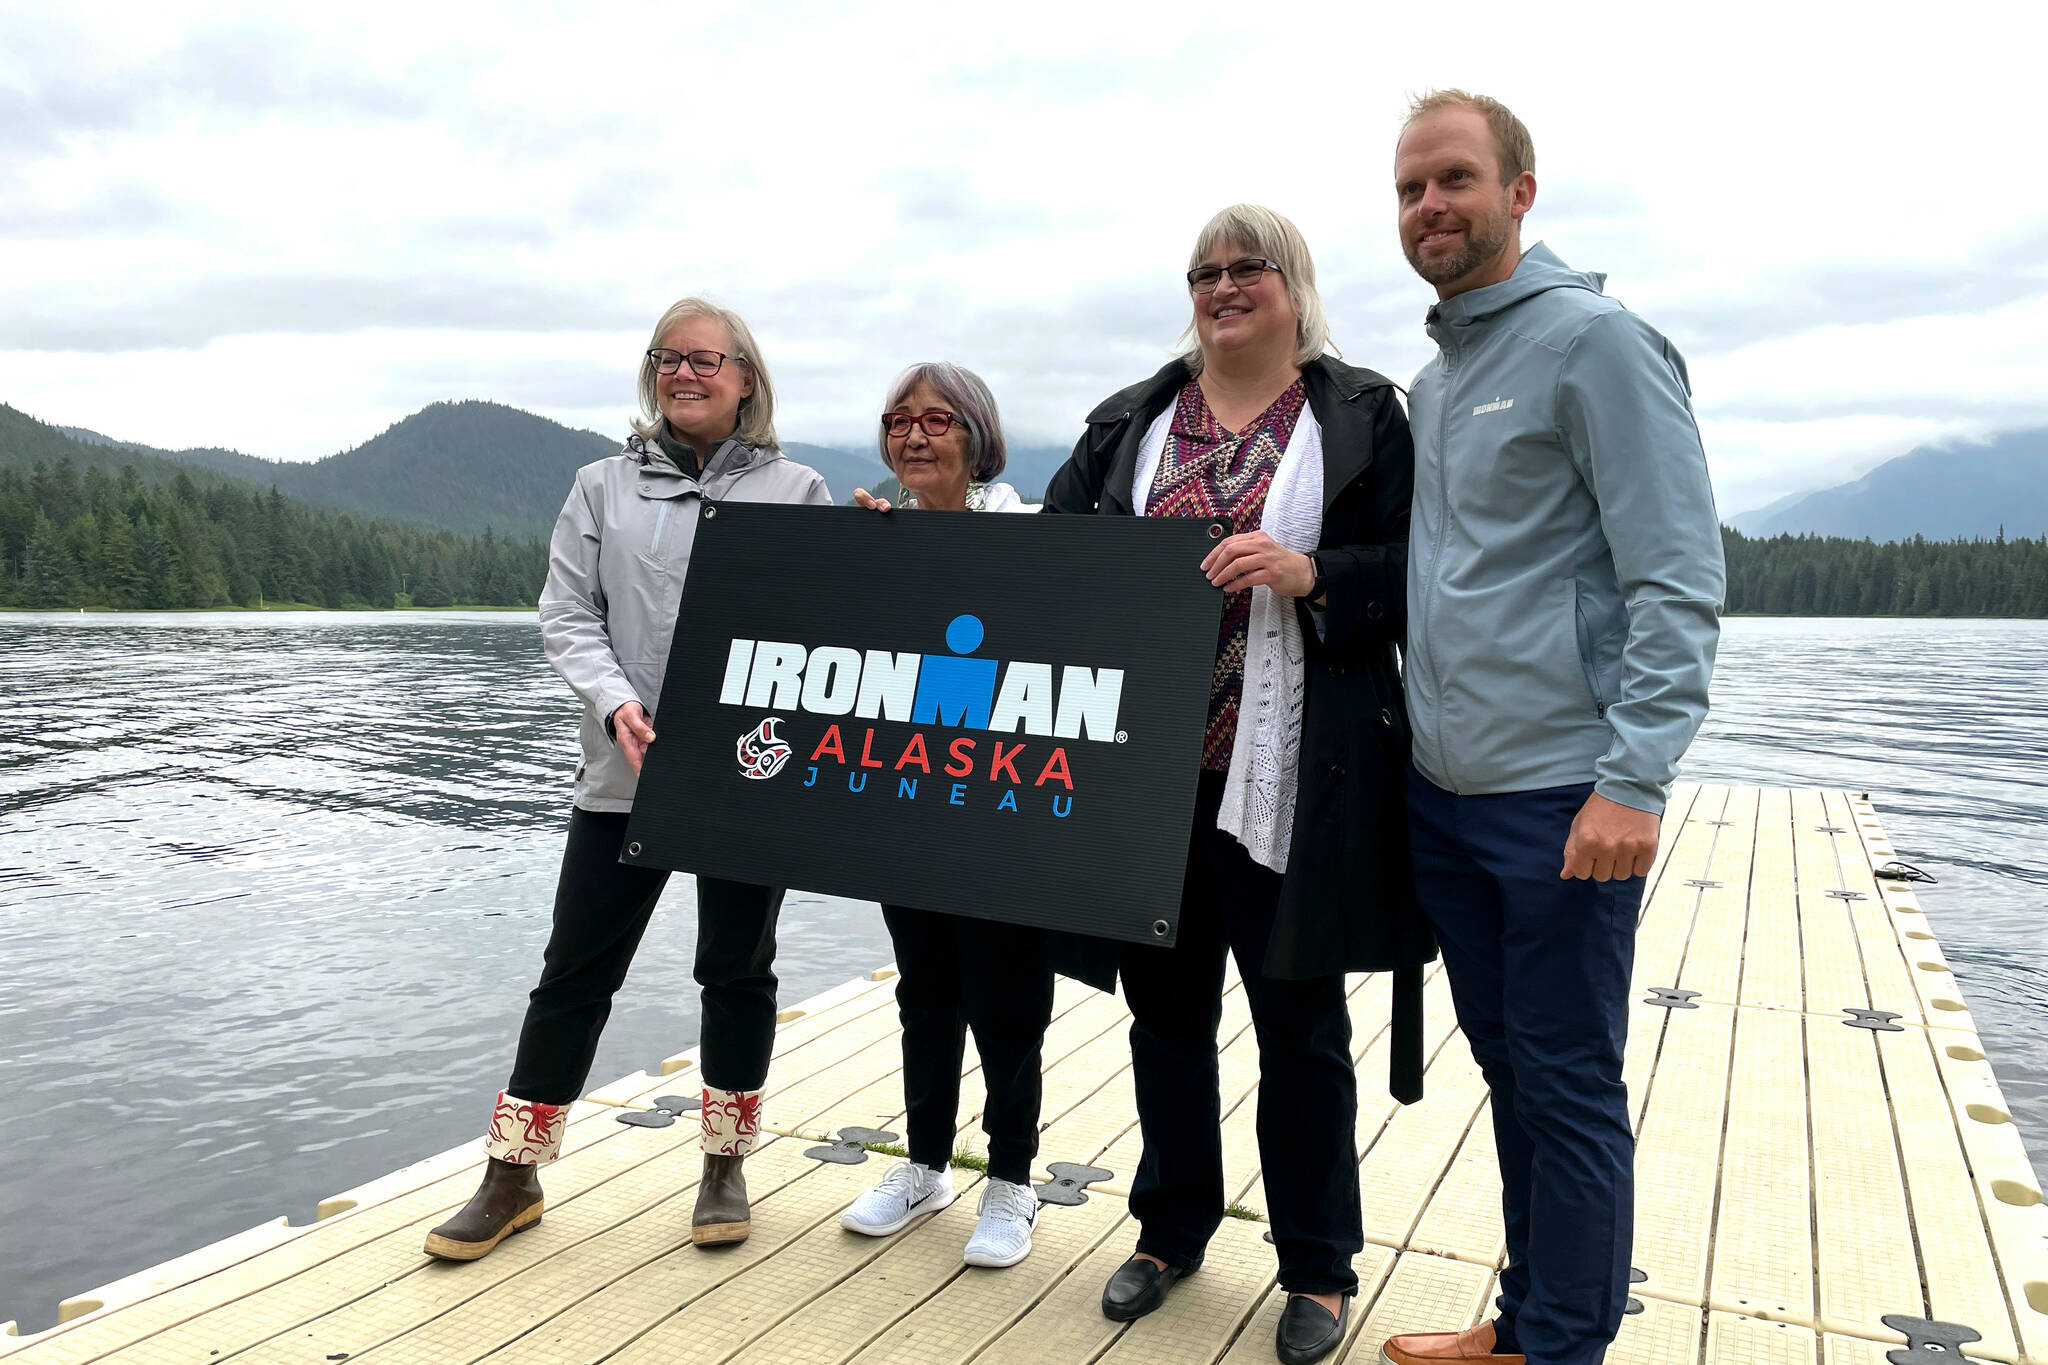 Travel Juneau CEO and President Liz Perry, Sealaska Heritage Institute President Rosita Worl, City and Borough of Juneau Mayor Beth Weldon, and Ironman regional director Dave Christen hold a sign for the 2022 Juneau Ironman event as they announce the race’s Alaska debut on the University of Alaska- Southeast campus on Aug. 9, 2021. (Michael S. Lockett / Juneau Empire File)